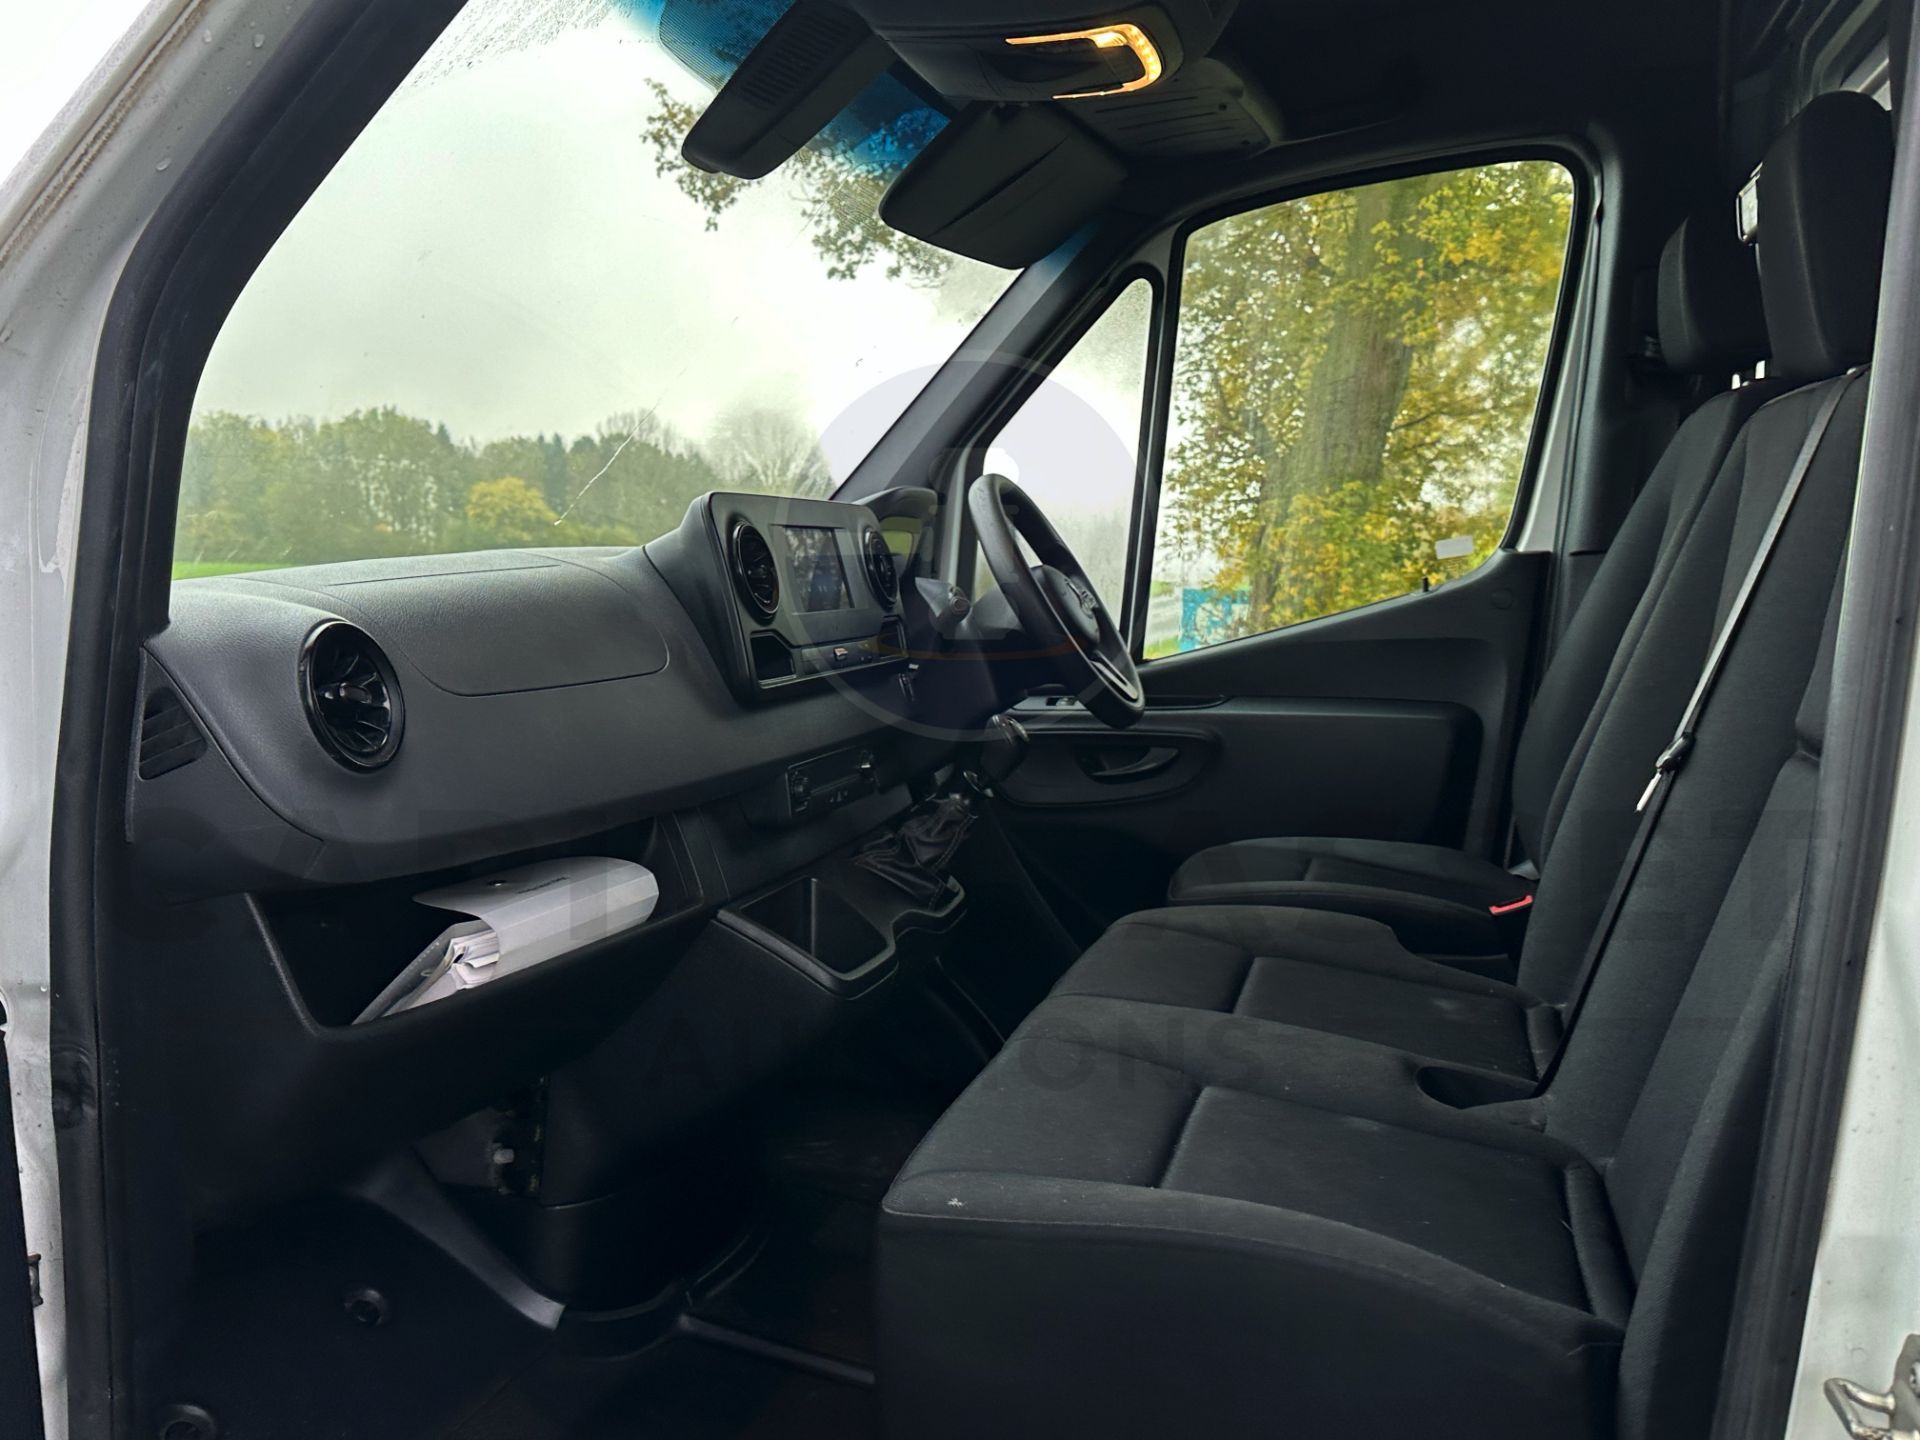 MERCEDES-BENZ SPRINTER 314 CDI *MWB - REFRIGERATED VAN* (2019 - FACELIFT MODEL) *OVERNIGHT STANDBY* - Image 22 of 45